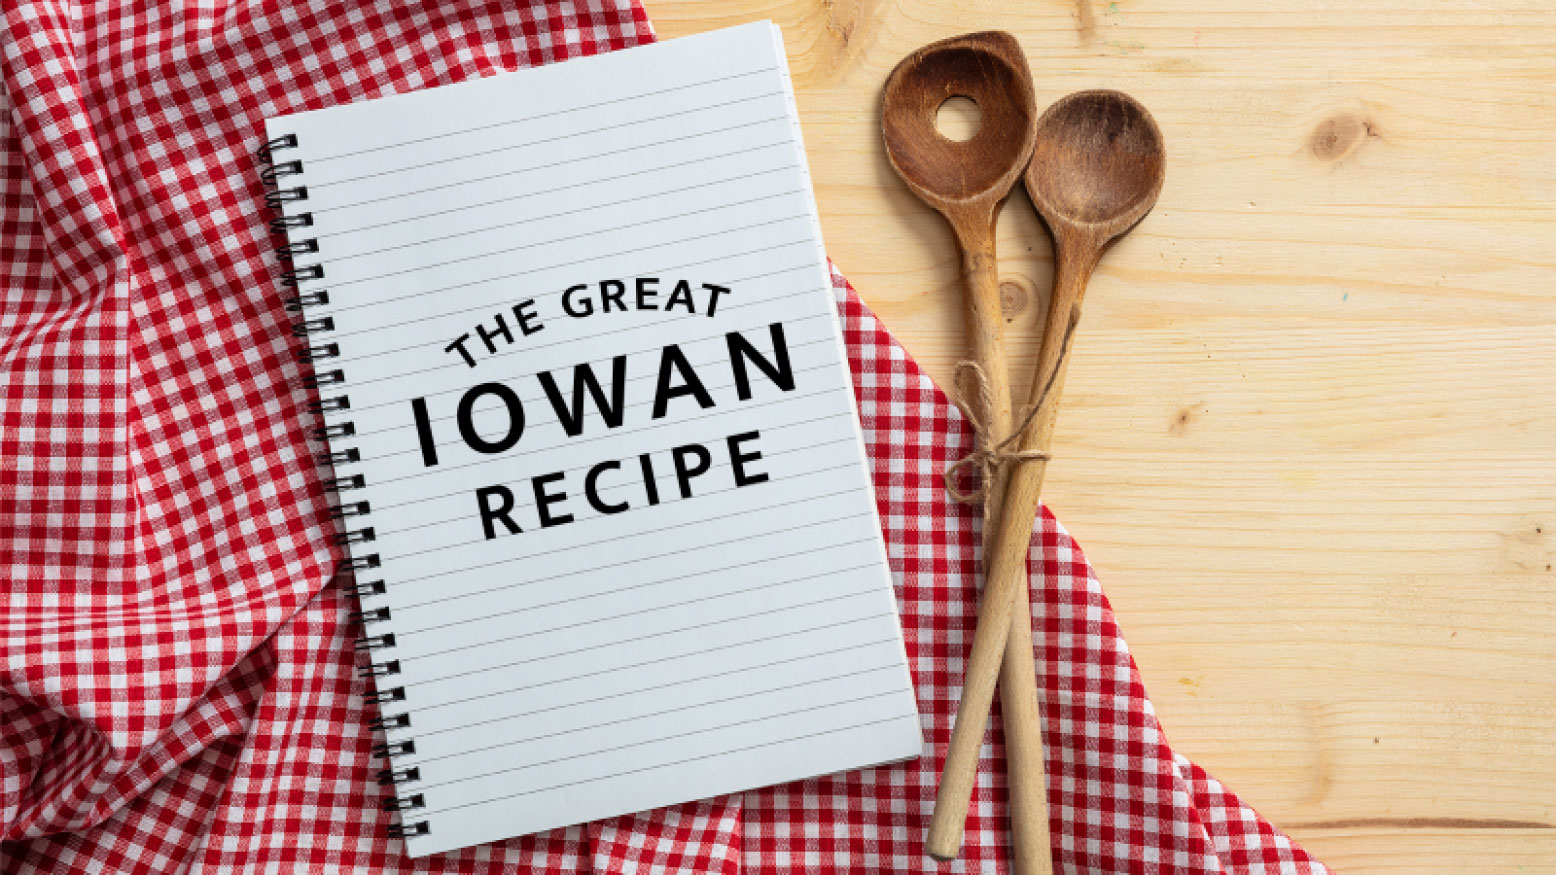 The Great Iowan Recipe text with wooden spoon and checker cloth